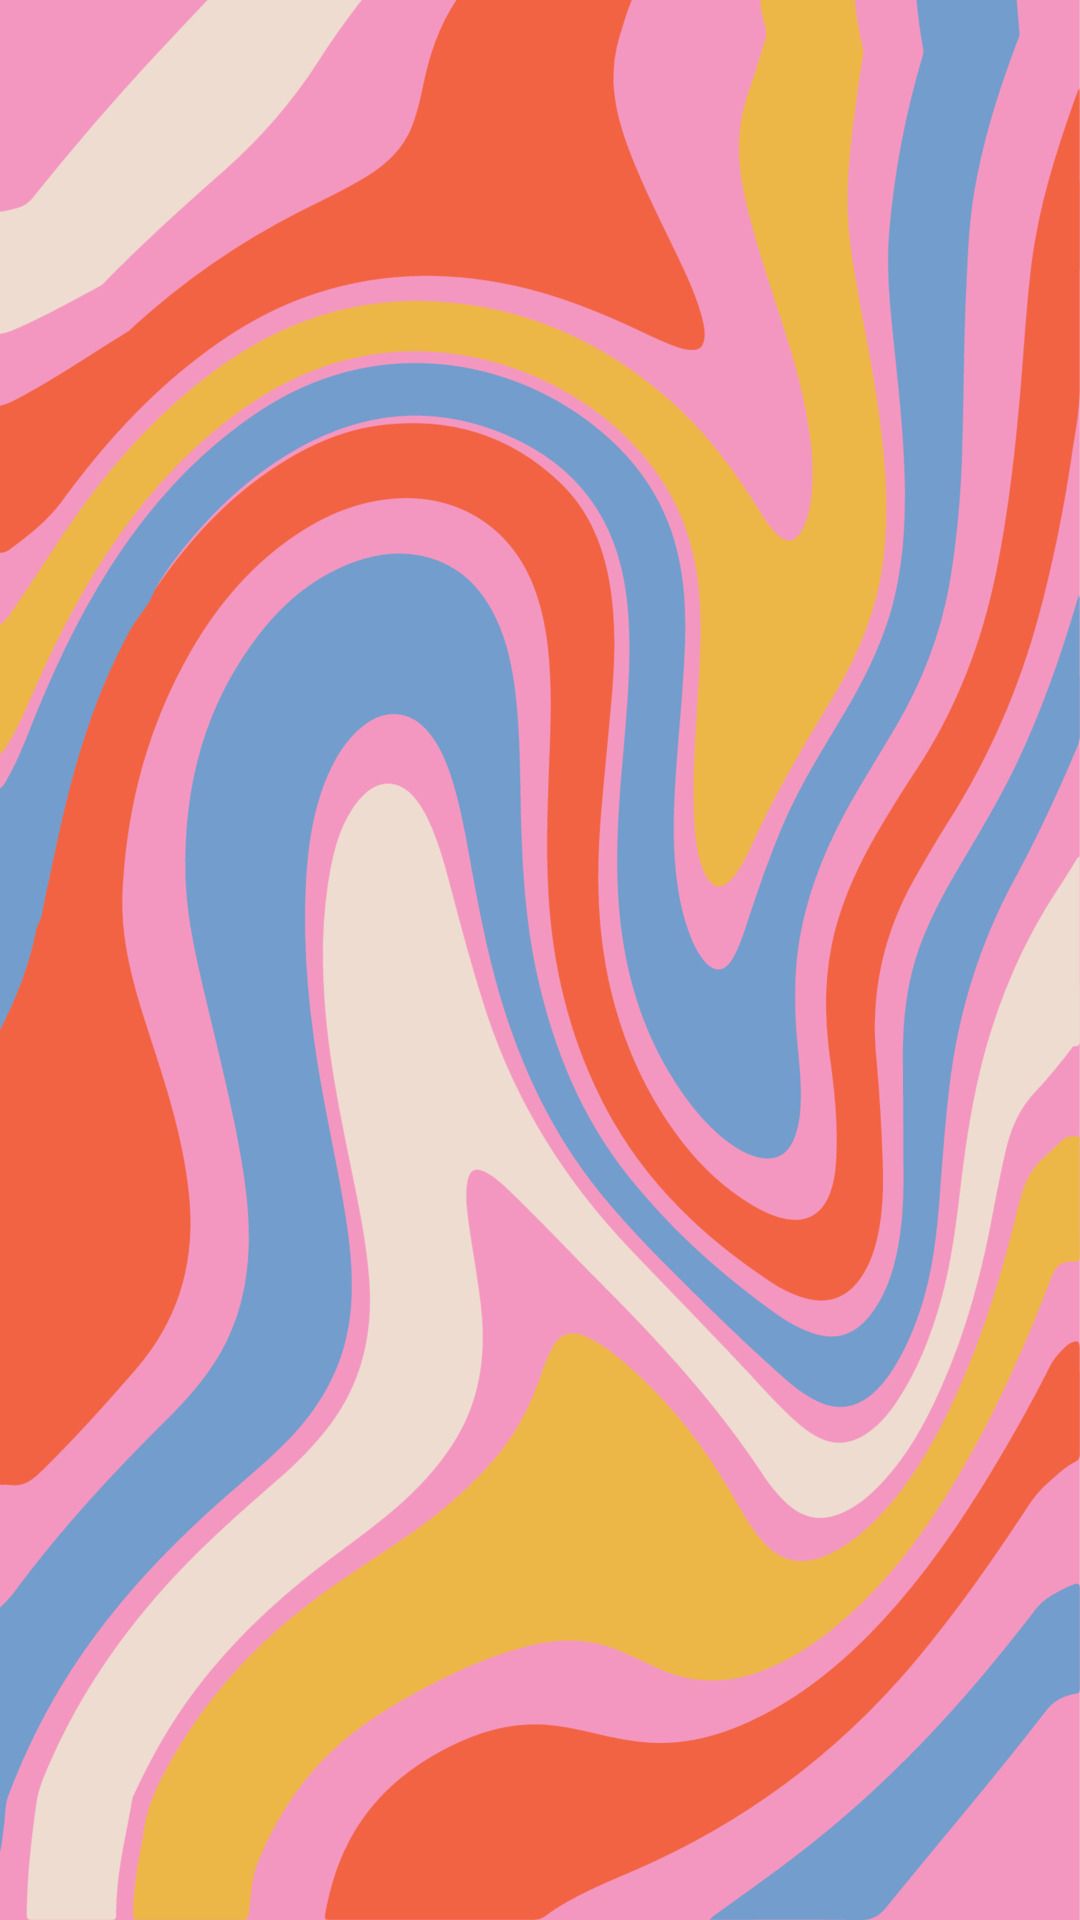 1970s Wavy Swirl vertical background. Hand Drawn marble Vector Illustration. Seventies Style, Groovy backdrop, psychedelic screen Wallpaper. Flat simple Design in Hippie Aesthetic